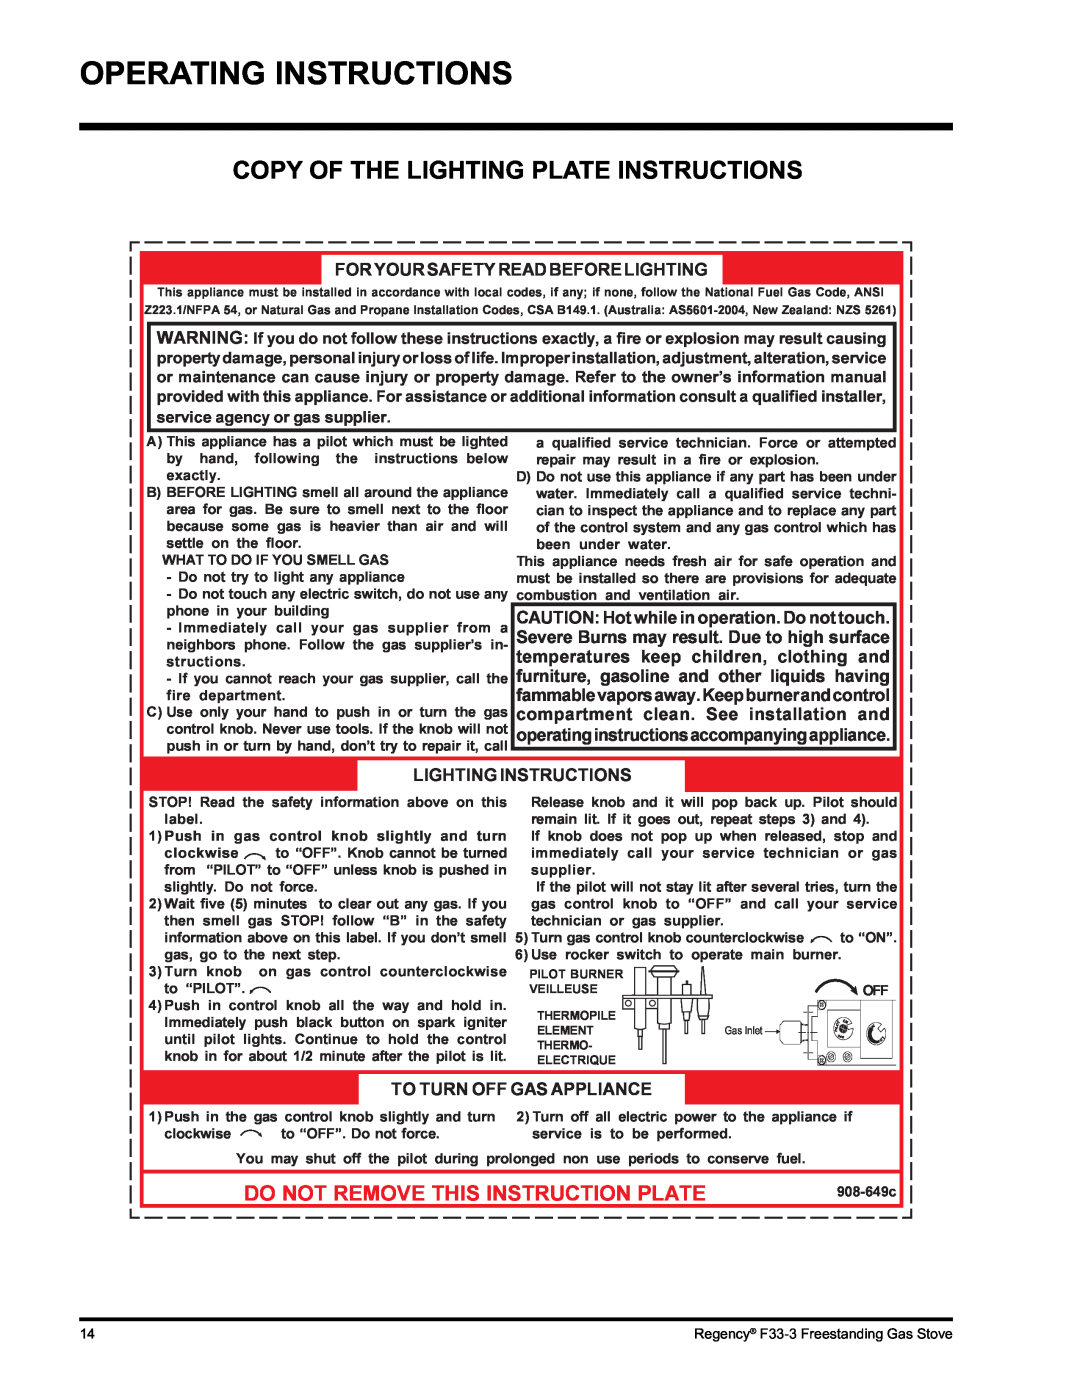 Regency Wraps F33 Copy Of The Lighting Plate Instructions, Operating Instructions, Do Not Remove This Instruction Plate 